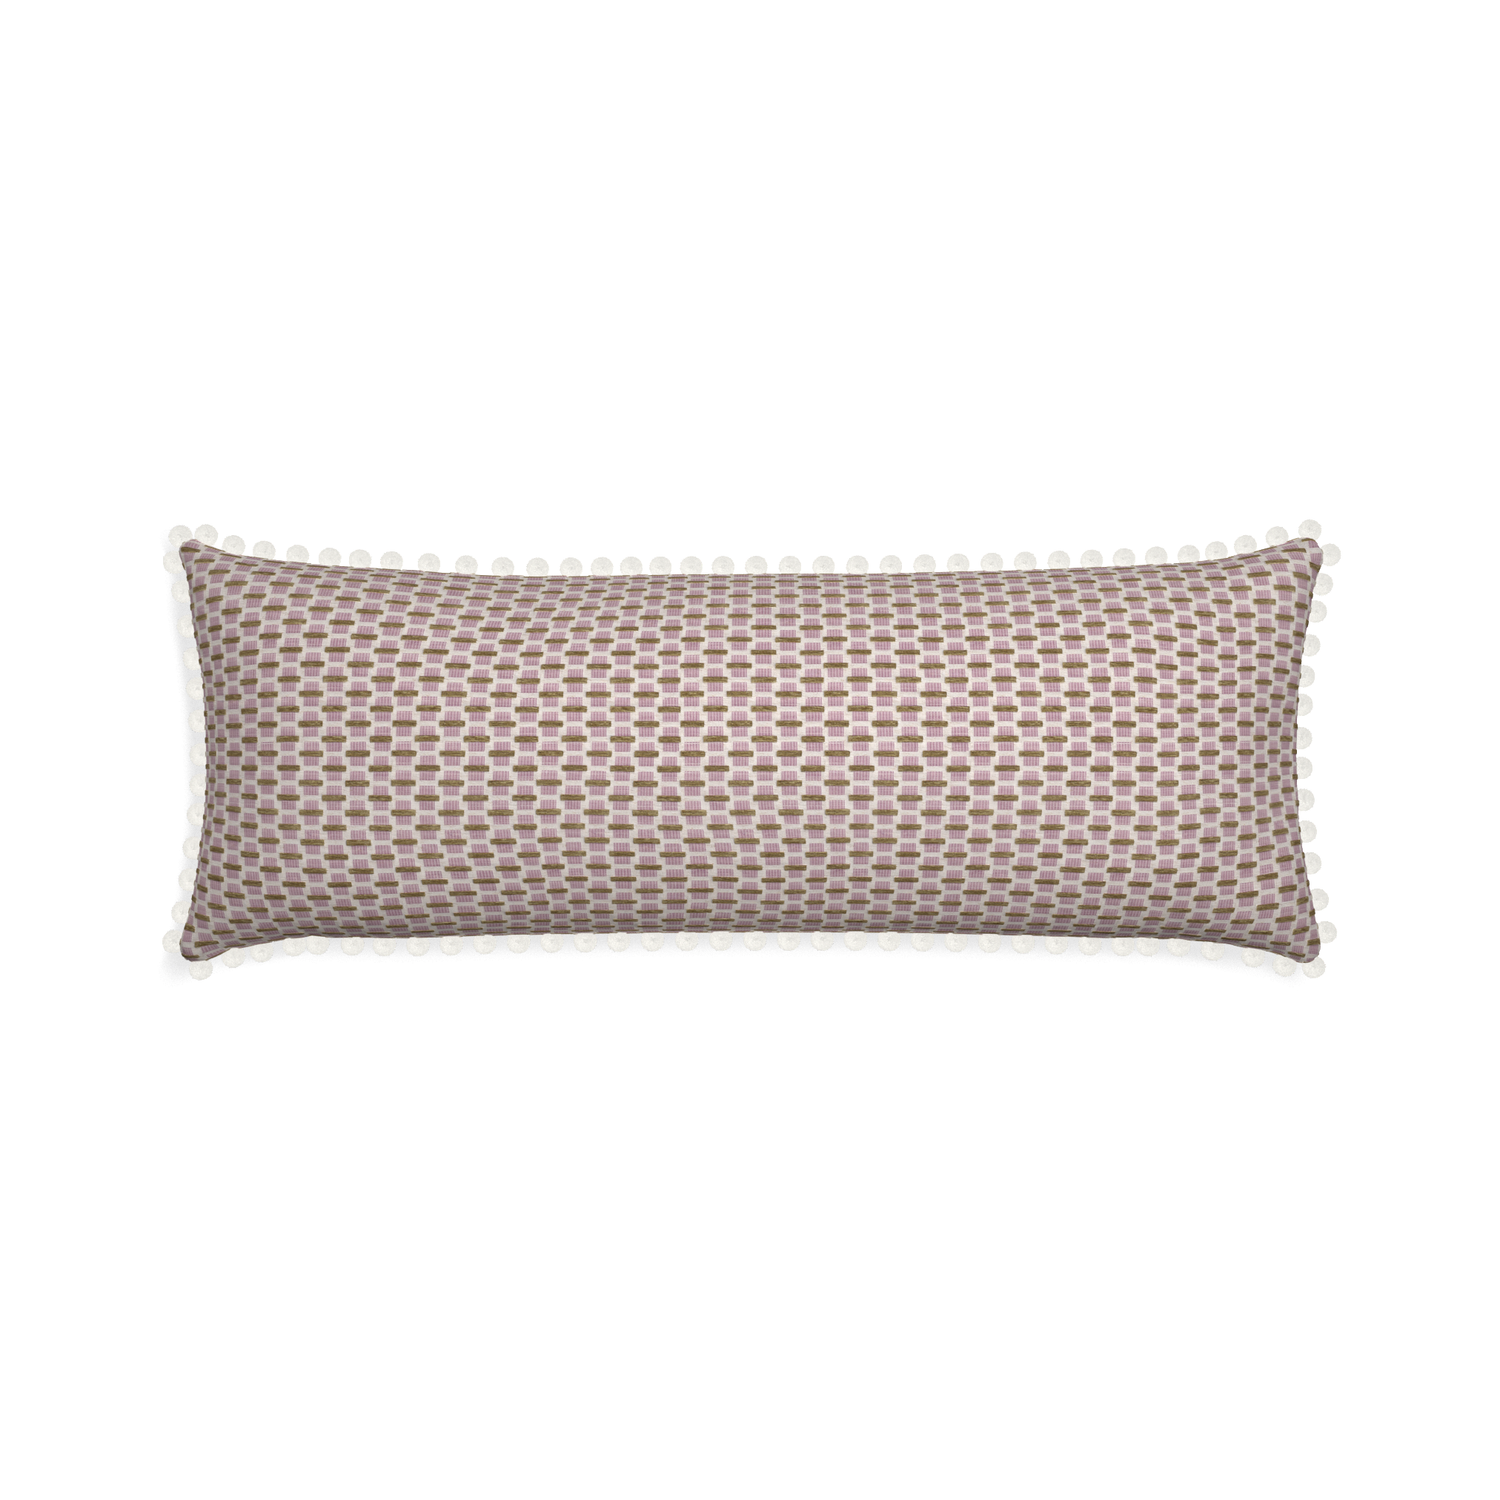 Xl-lumbar willow orchid custom pink geometric chenillepillow with snow pom pom on white background